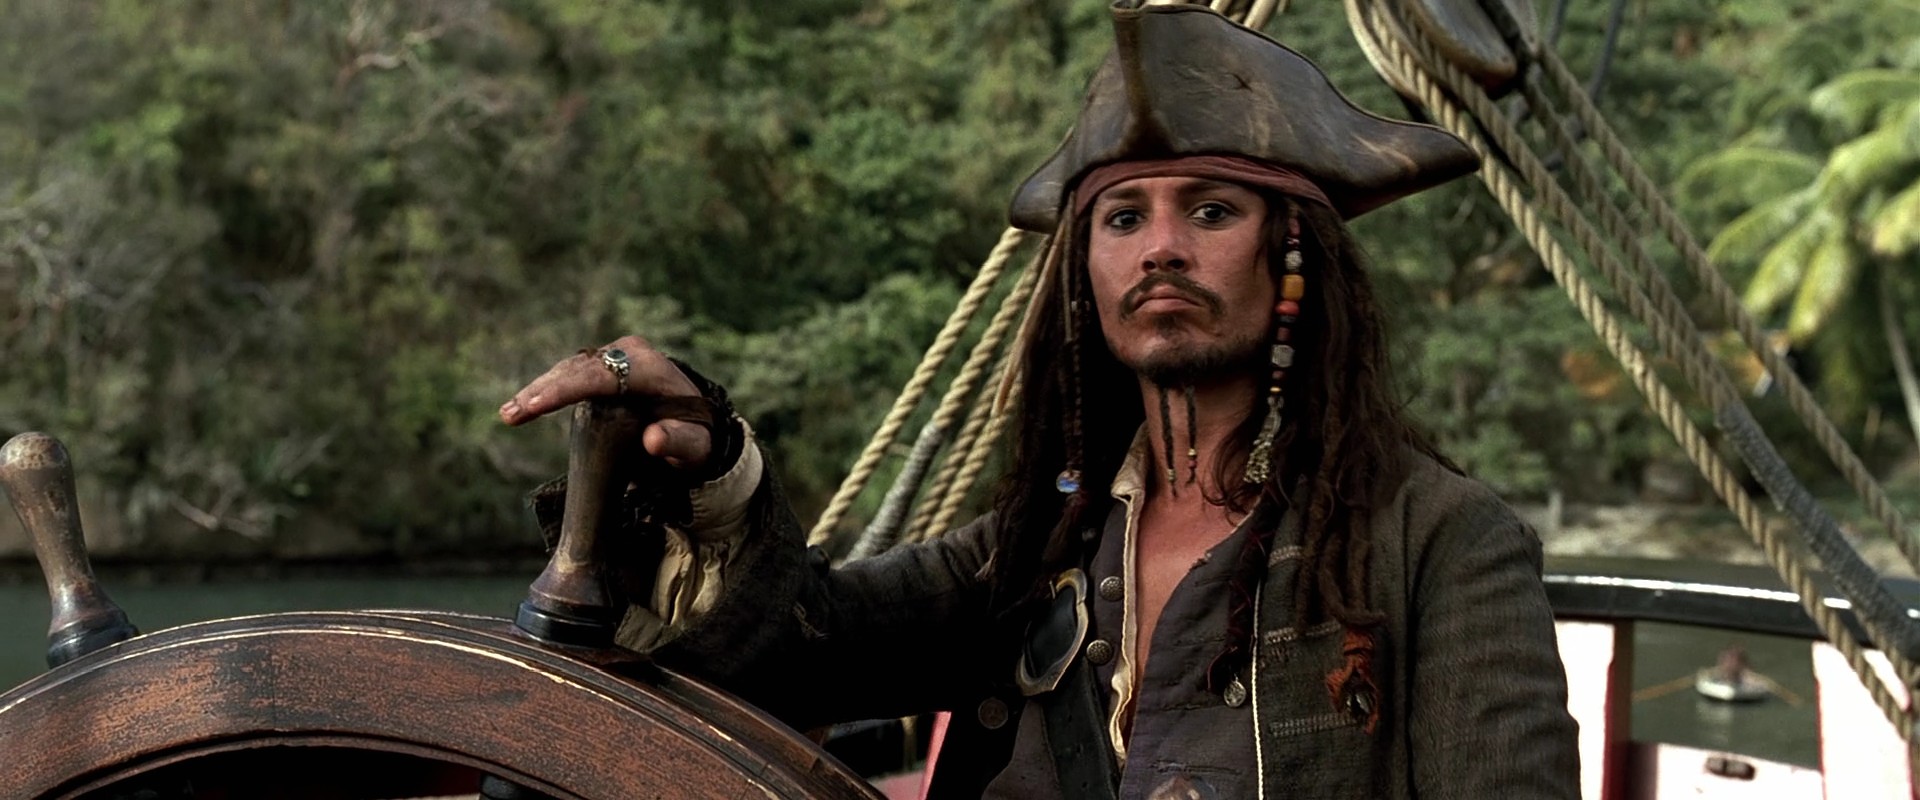 Pirates Of The Caribbean: The Curse Of The Black Pearl #8